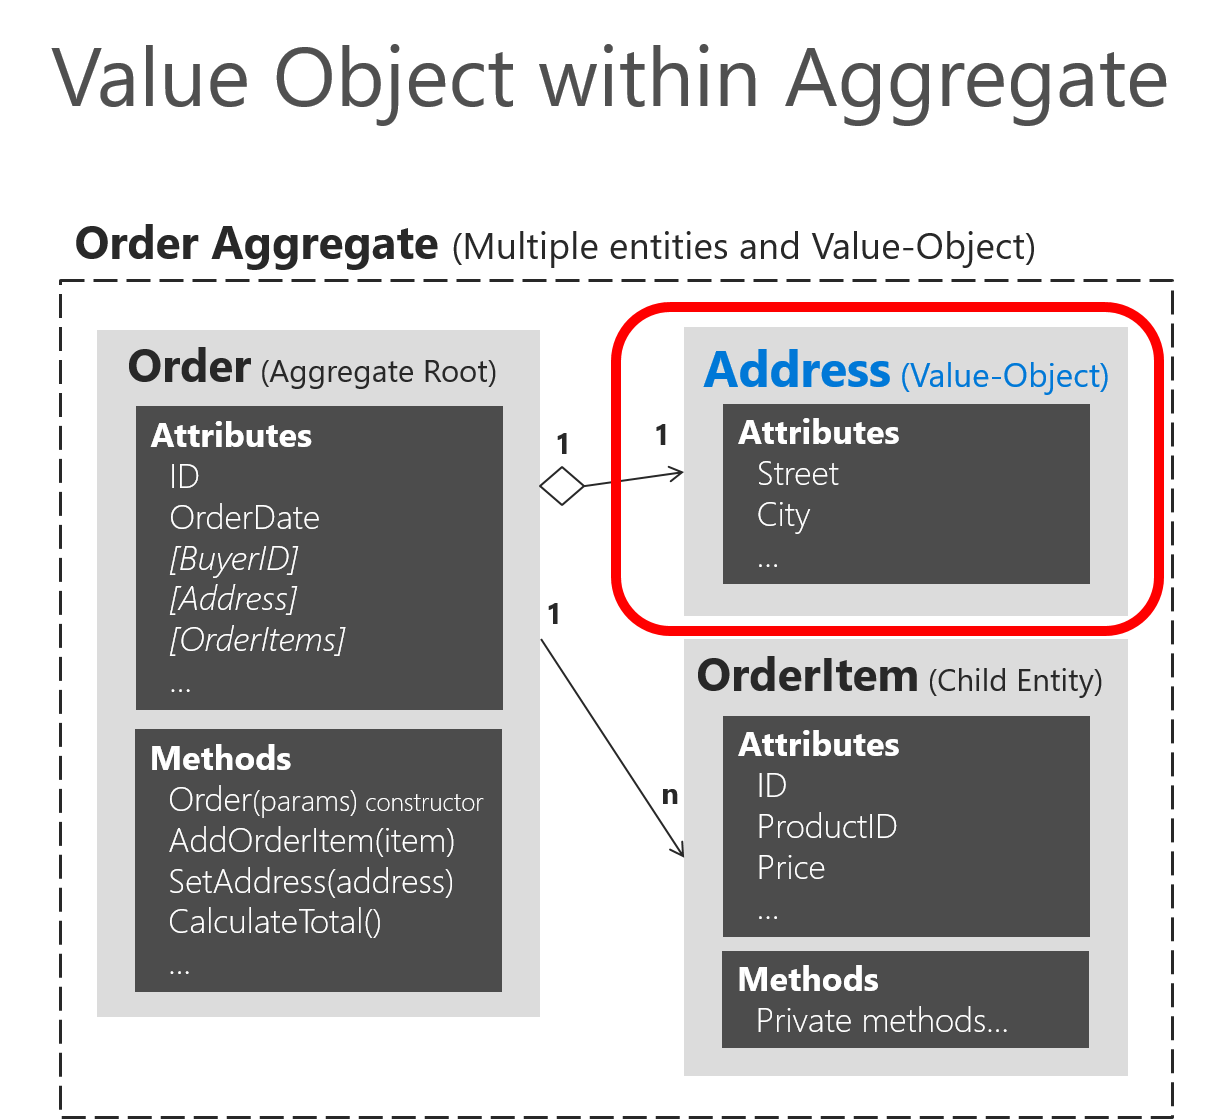 Diagram showing the Address value-object inside the Order Aggregate.